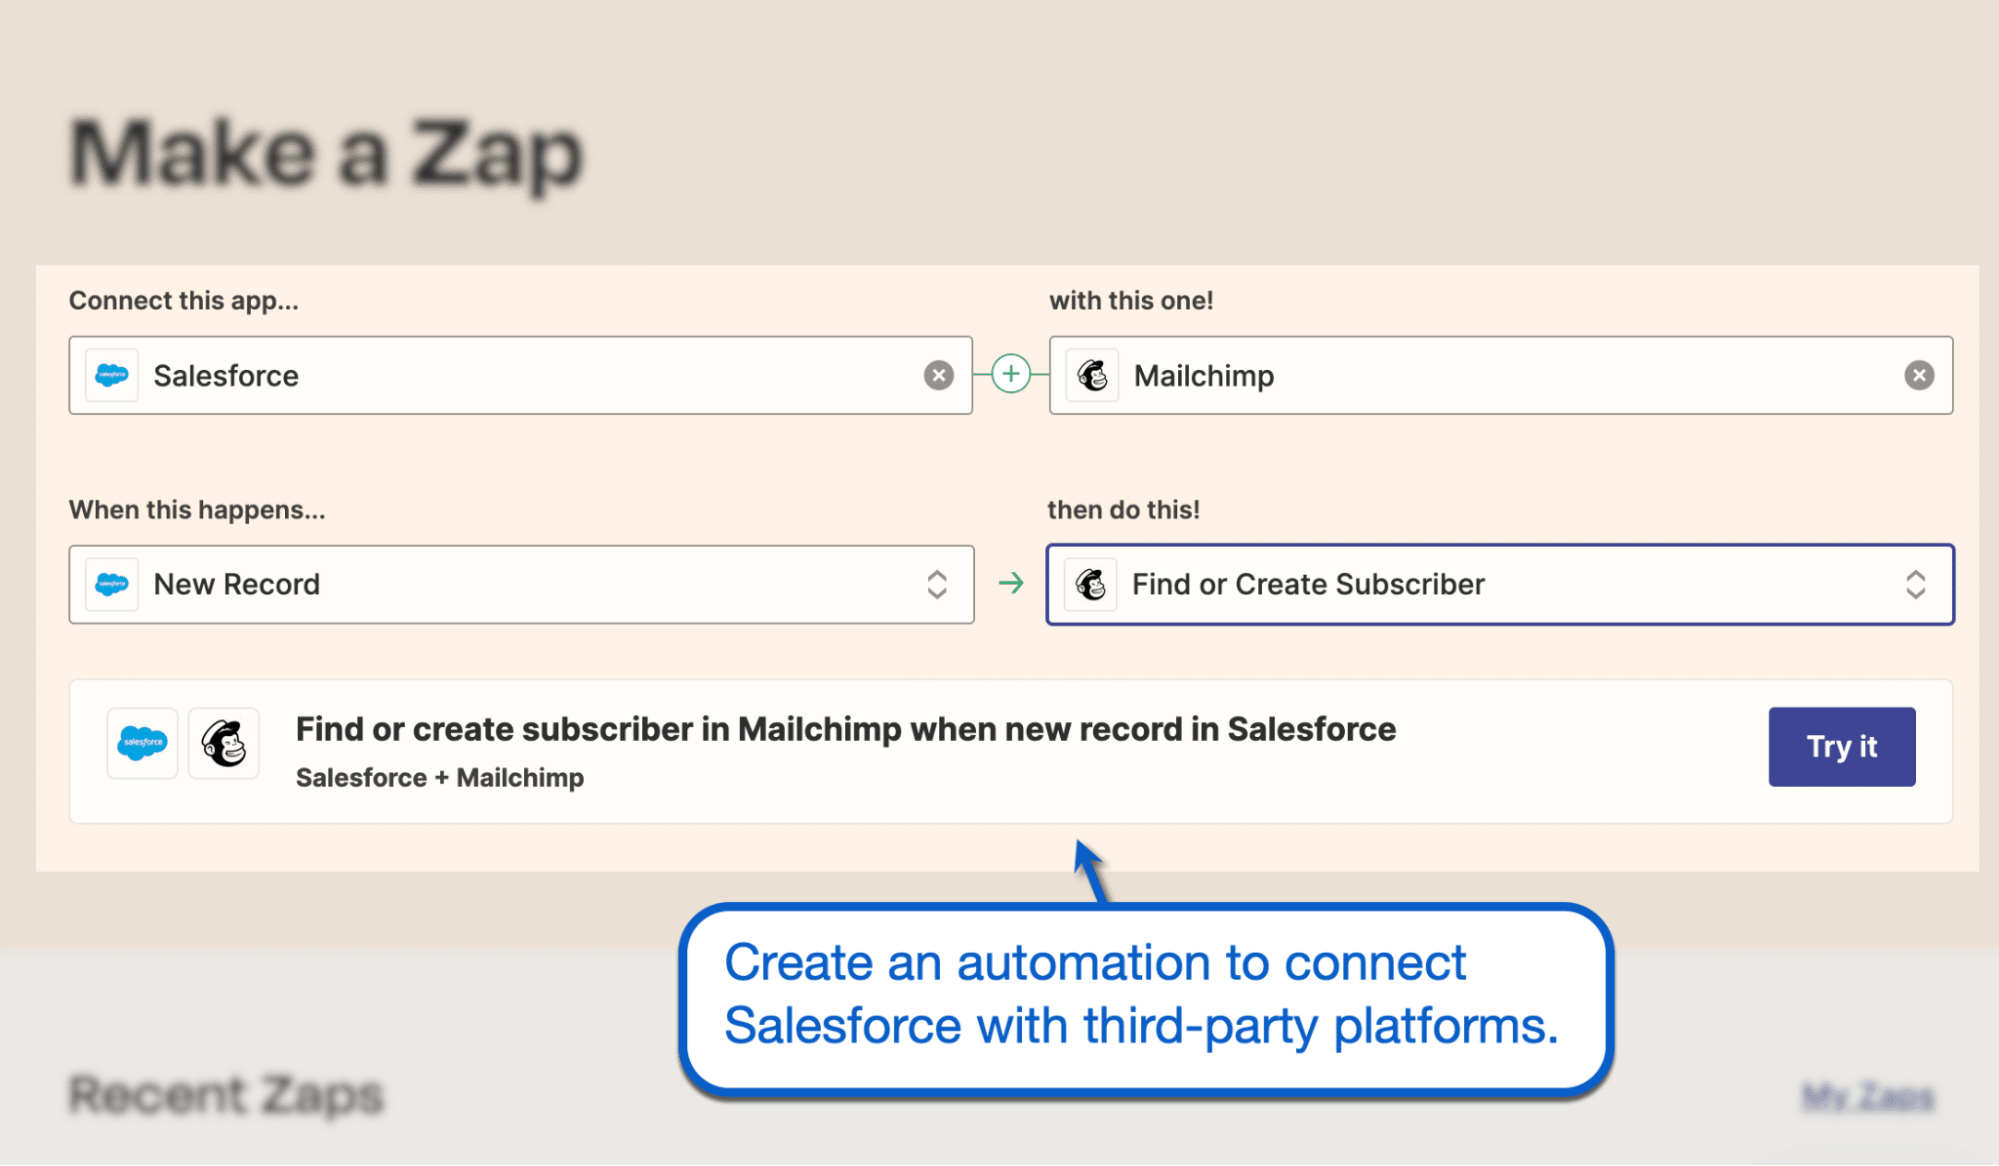 you can create a zap to connect salesforce with third-party platforms